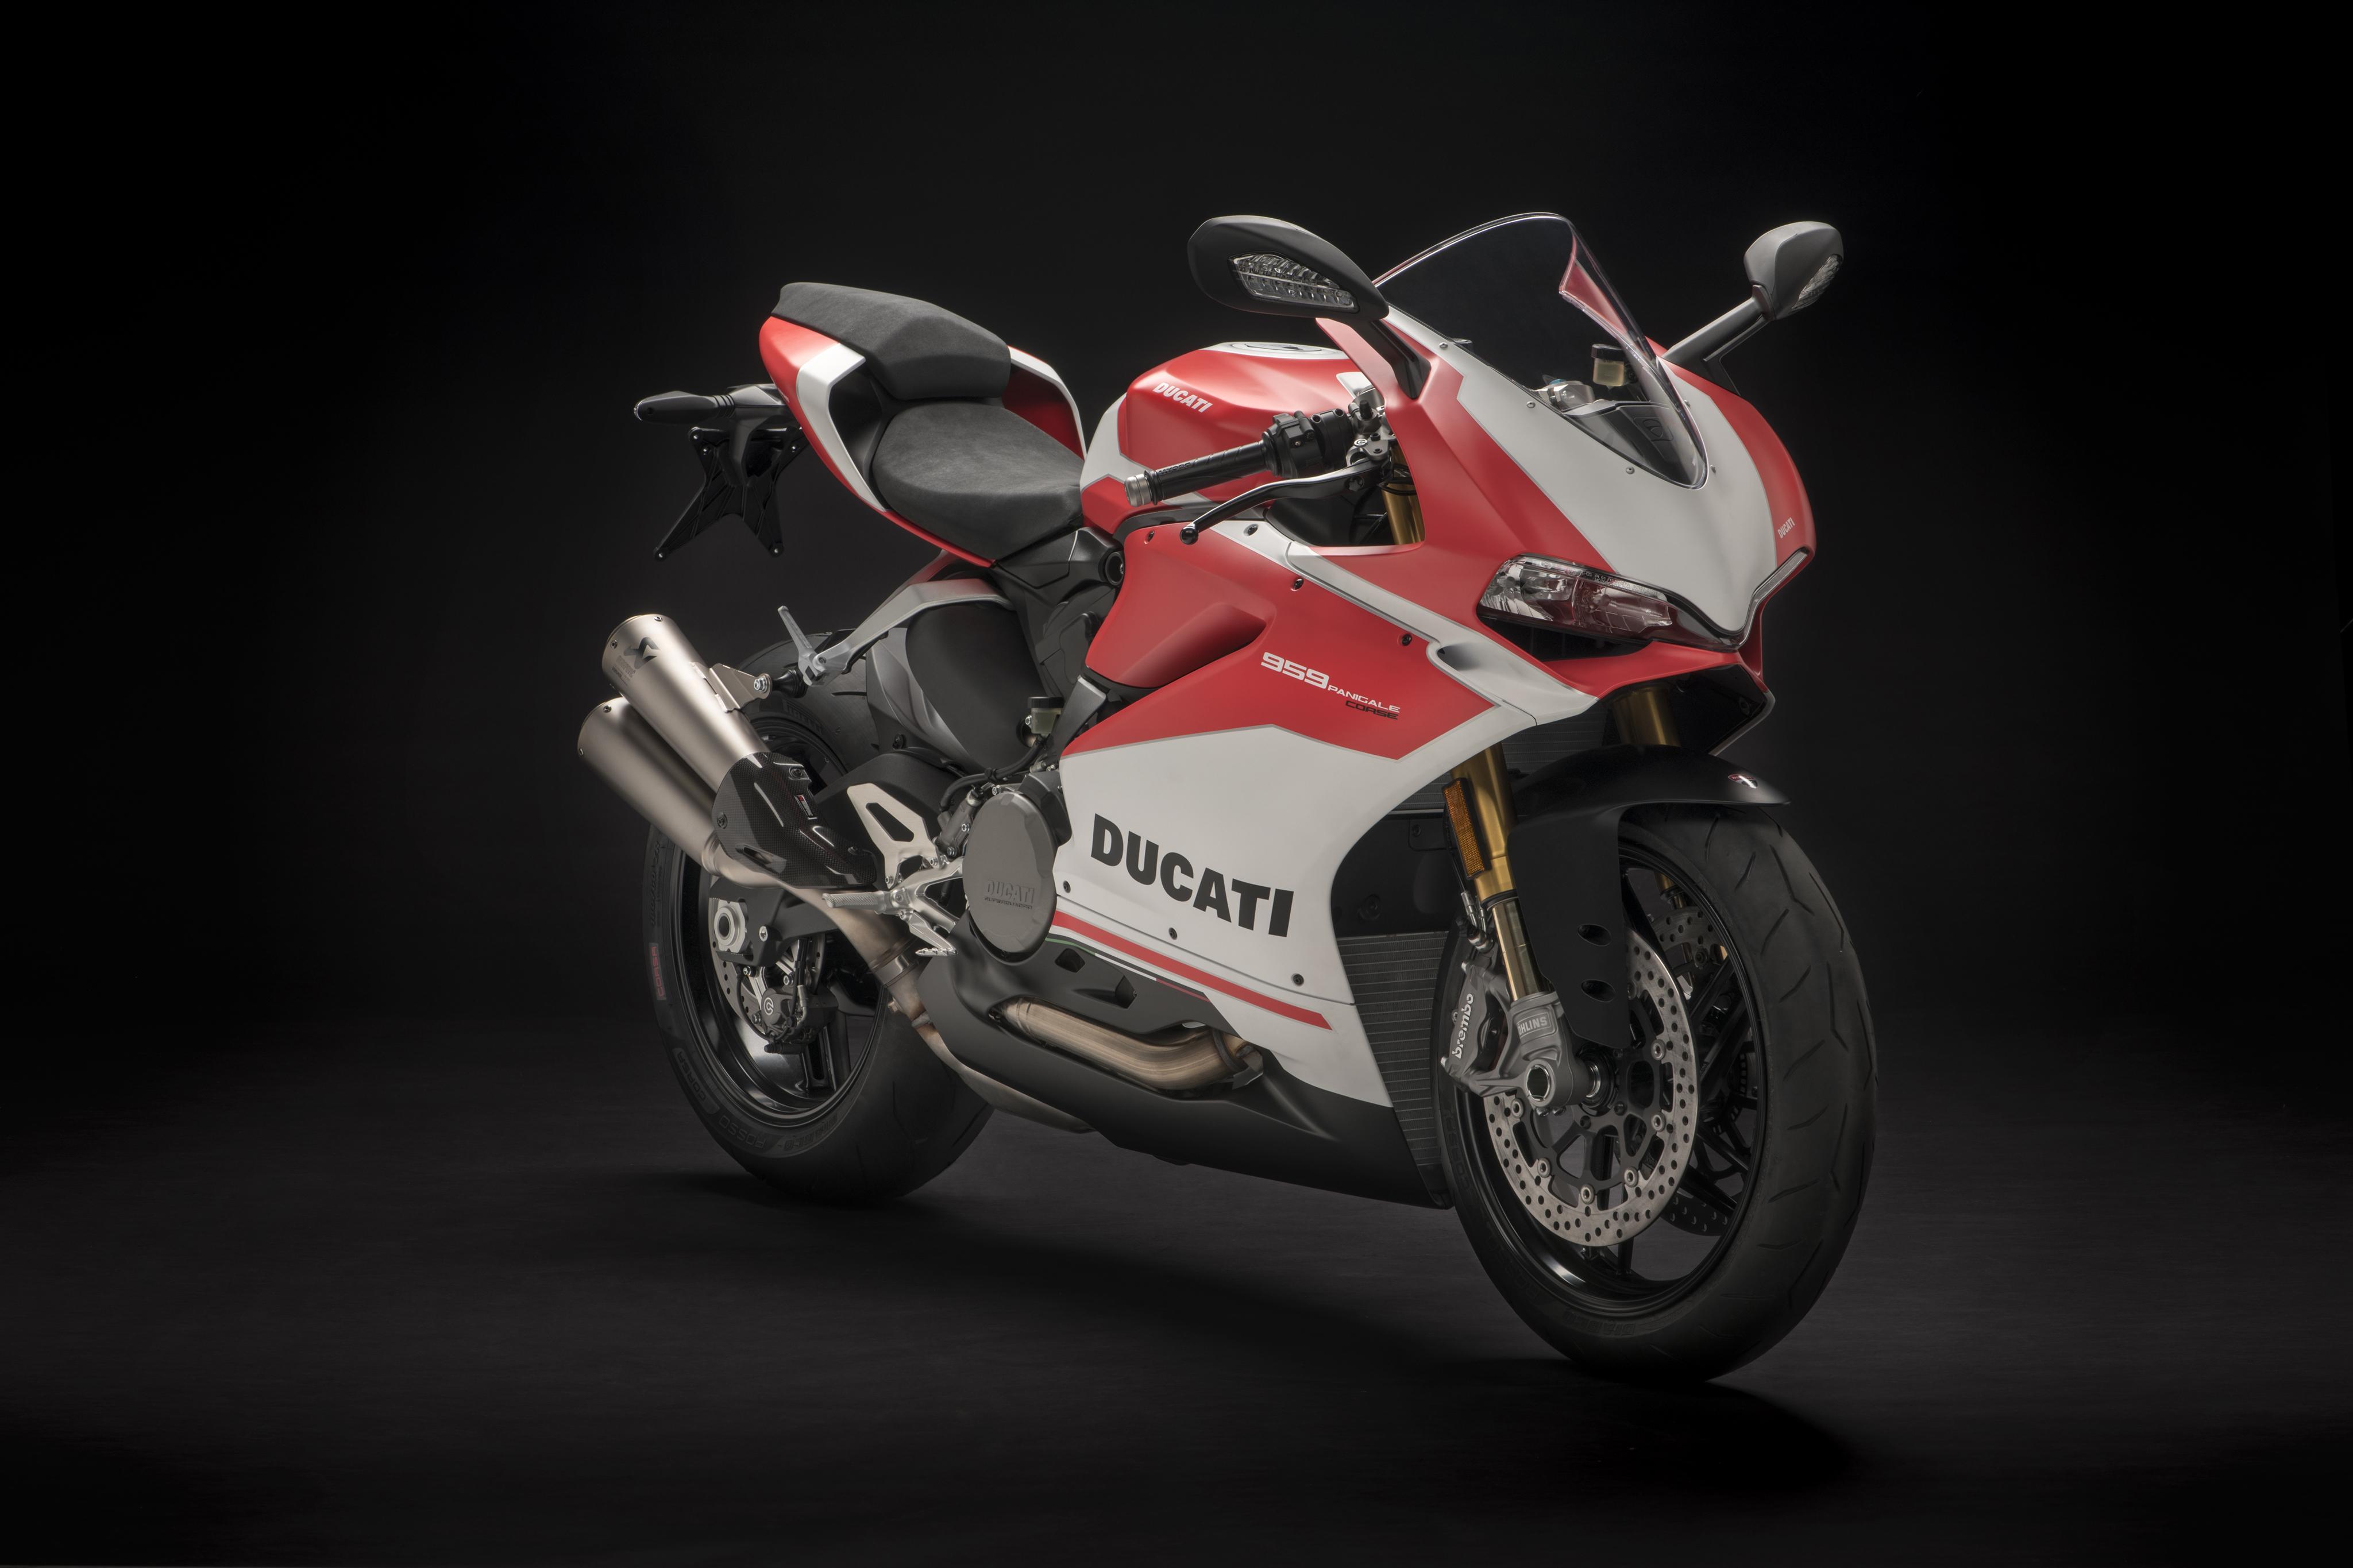 Red motorcycle Ducati 959 Panigale Corse, 2018 on a black background